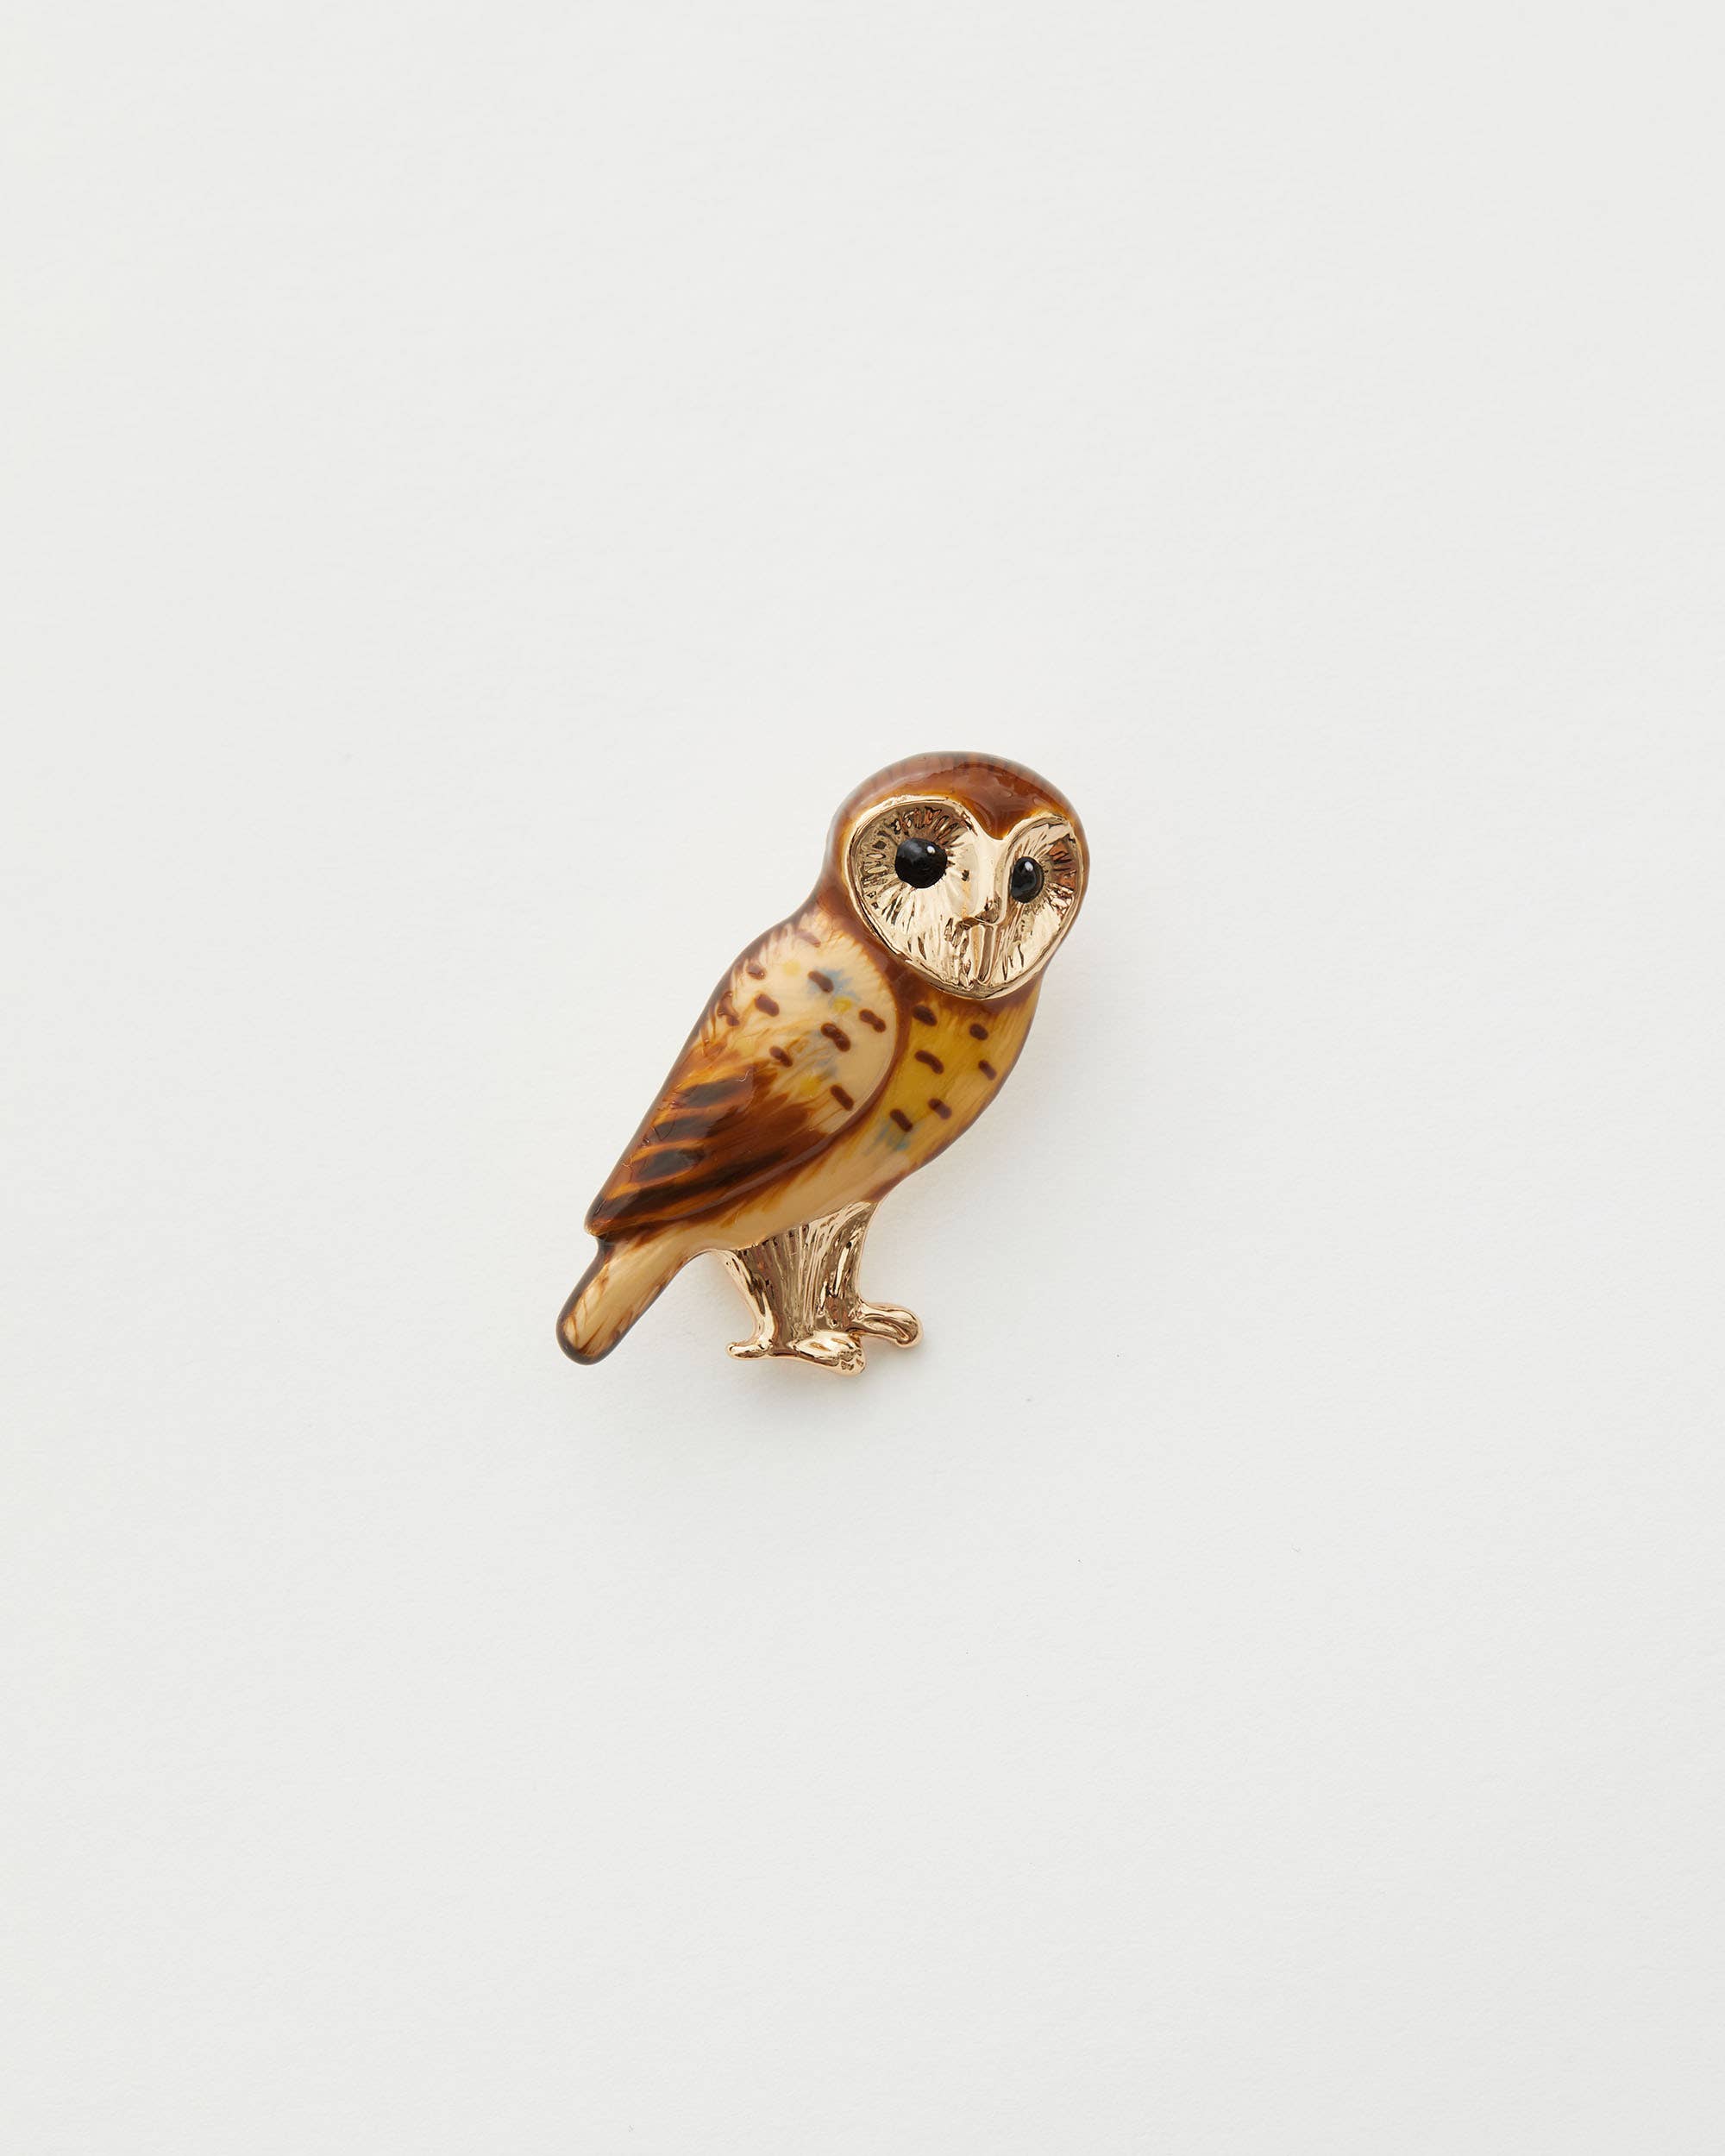 Barn Owl Brooch - Out of the Blue